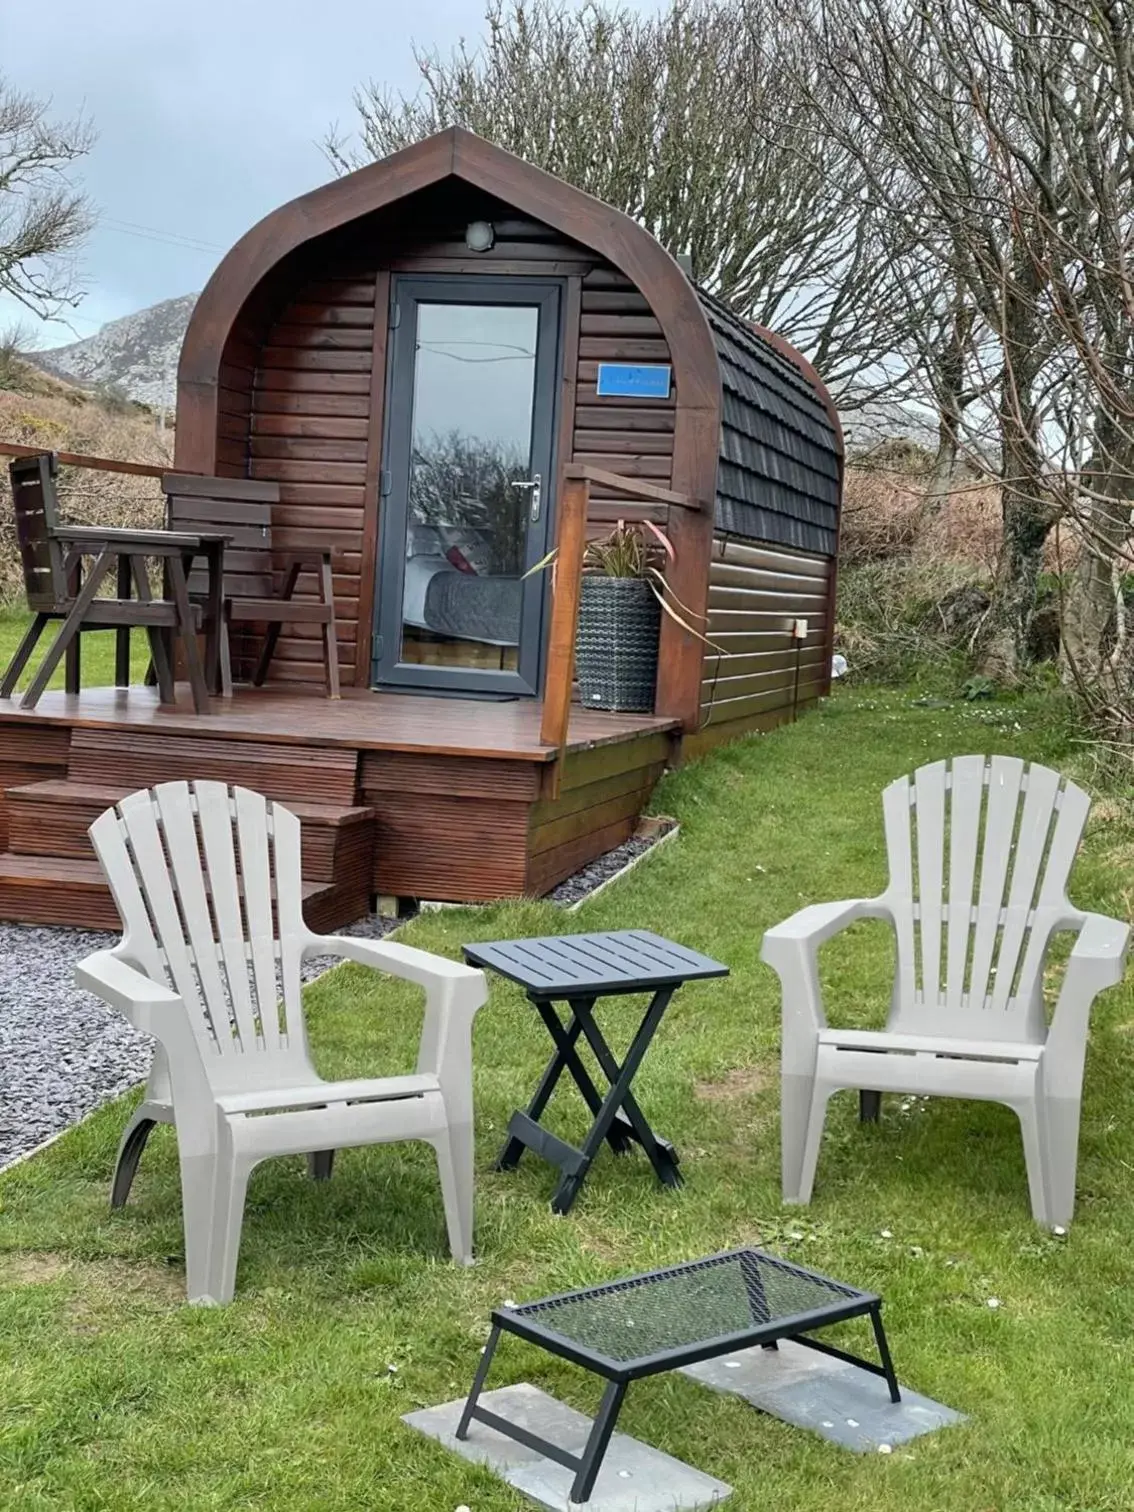 Property building, Garden in Sea and Mountain View Luxury Glamping Pods Heated